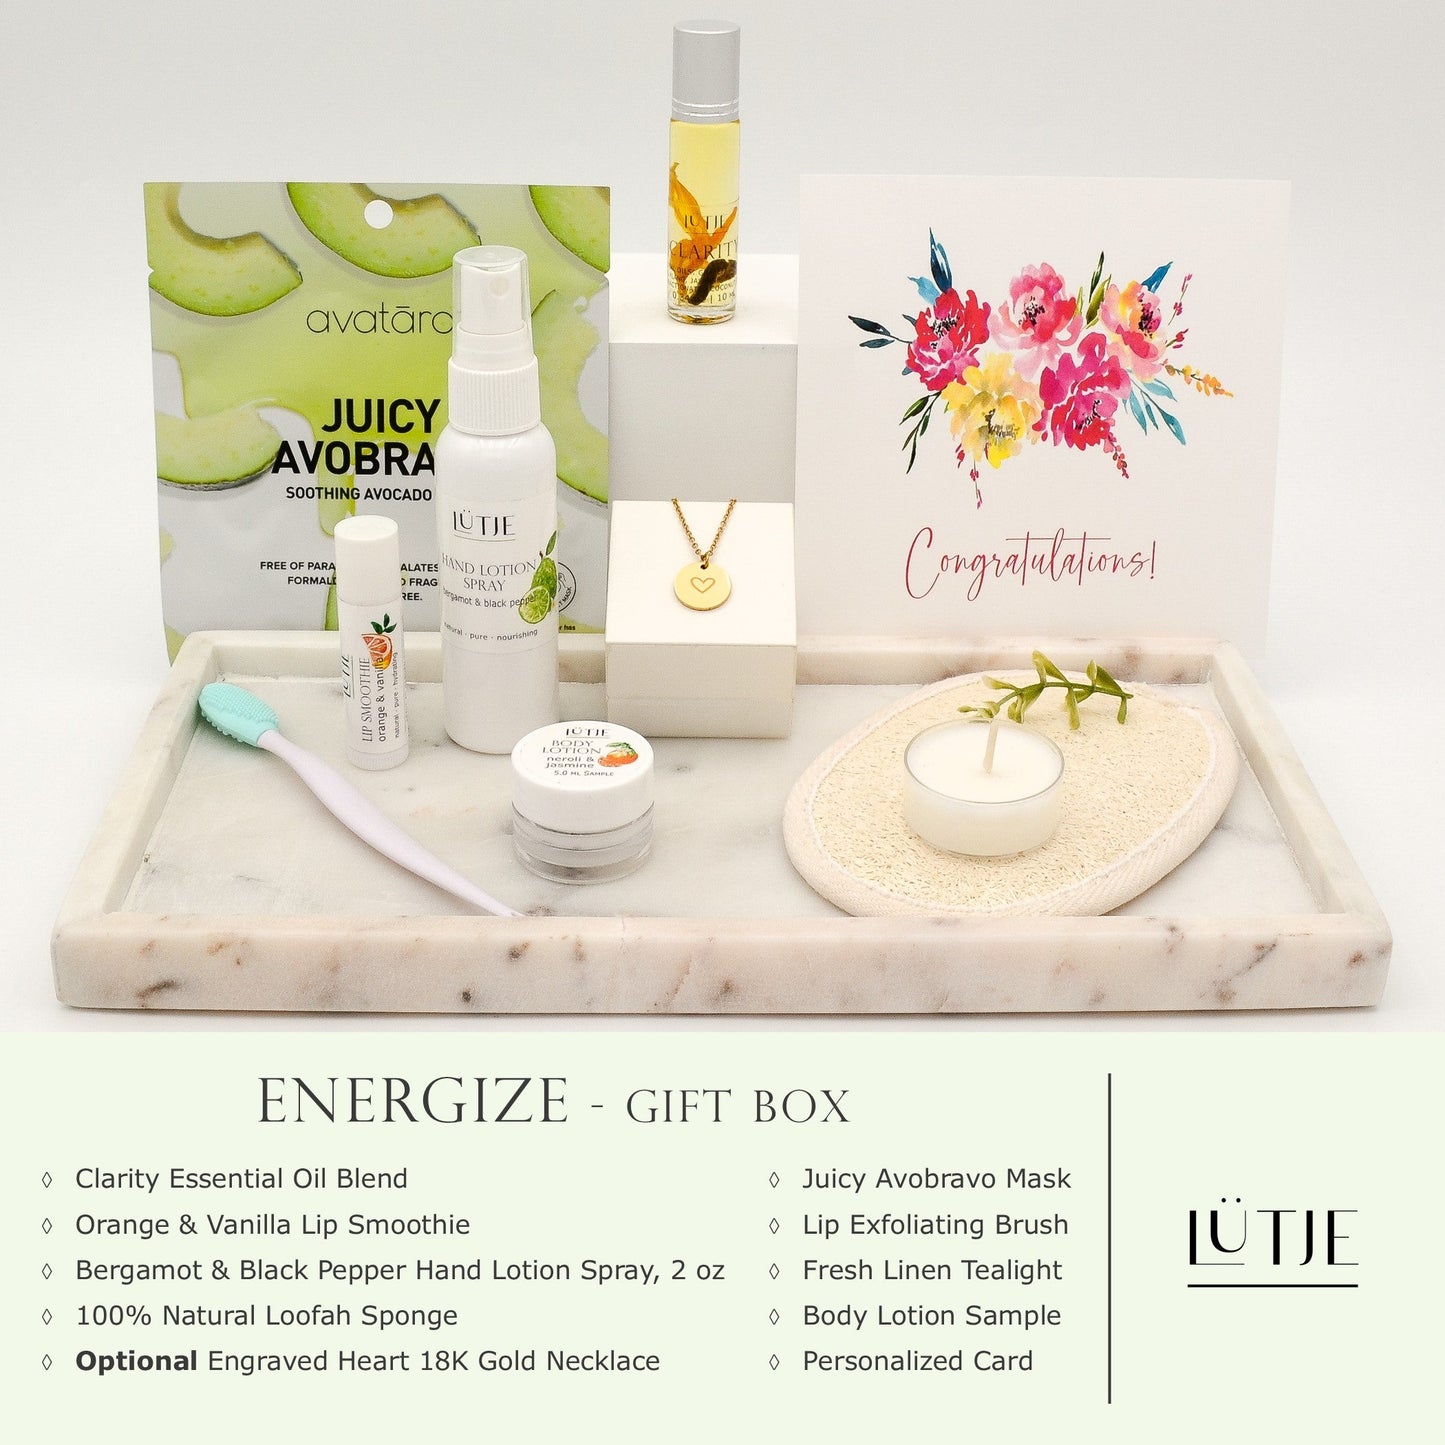 Energize Gift Box for women, BFF, wife, daughter, sister, mom, or grandma, includes Bergamot & Black Pepper hand lotion spray, essential oil, lip balm, hydrating face mask, other bath, spa and self-care items, and optional 18K gold-plated necklace with engraved heart.